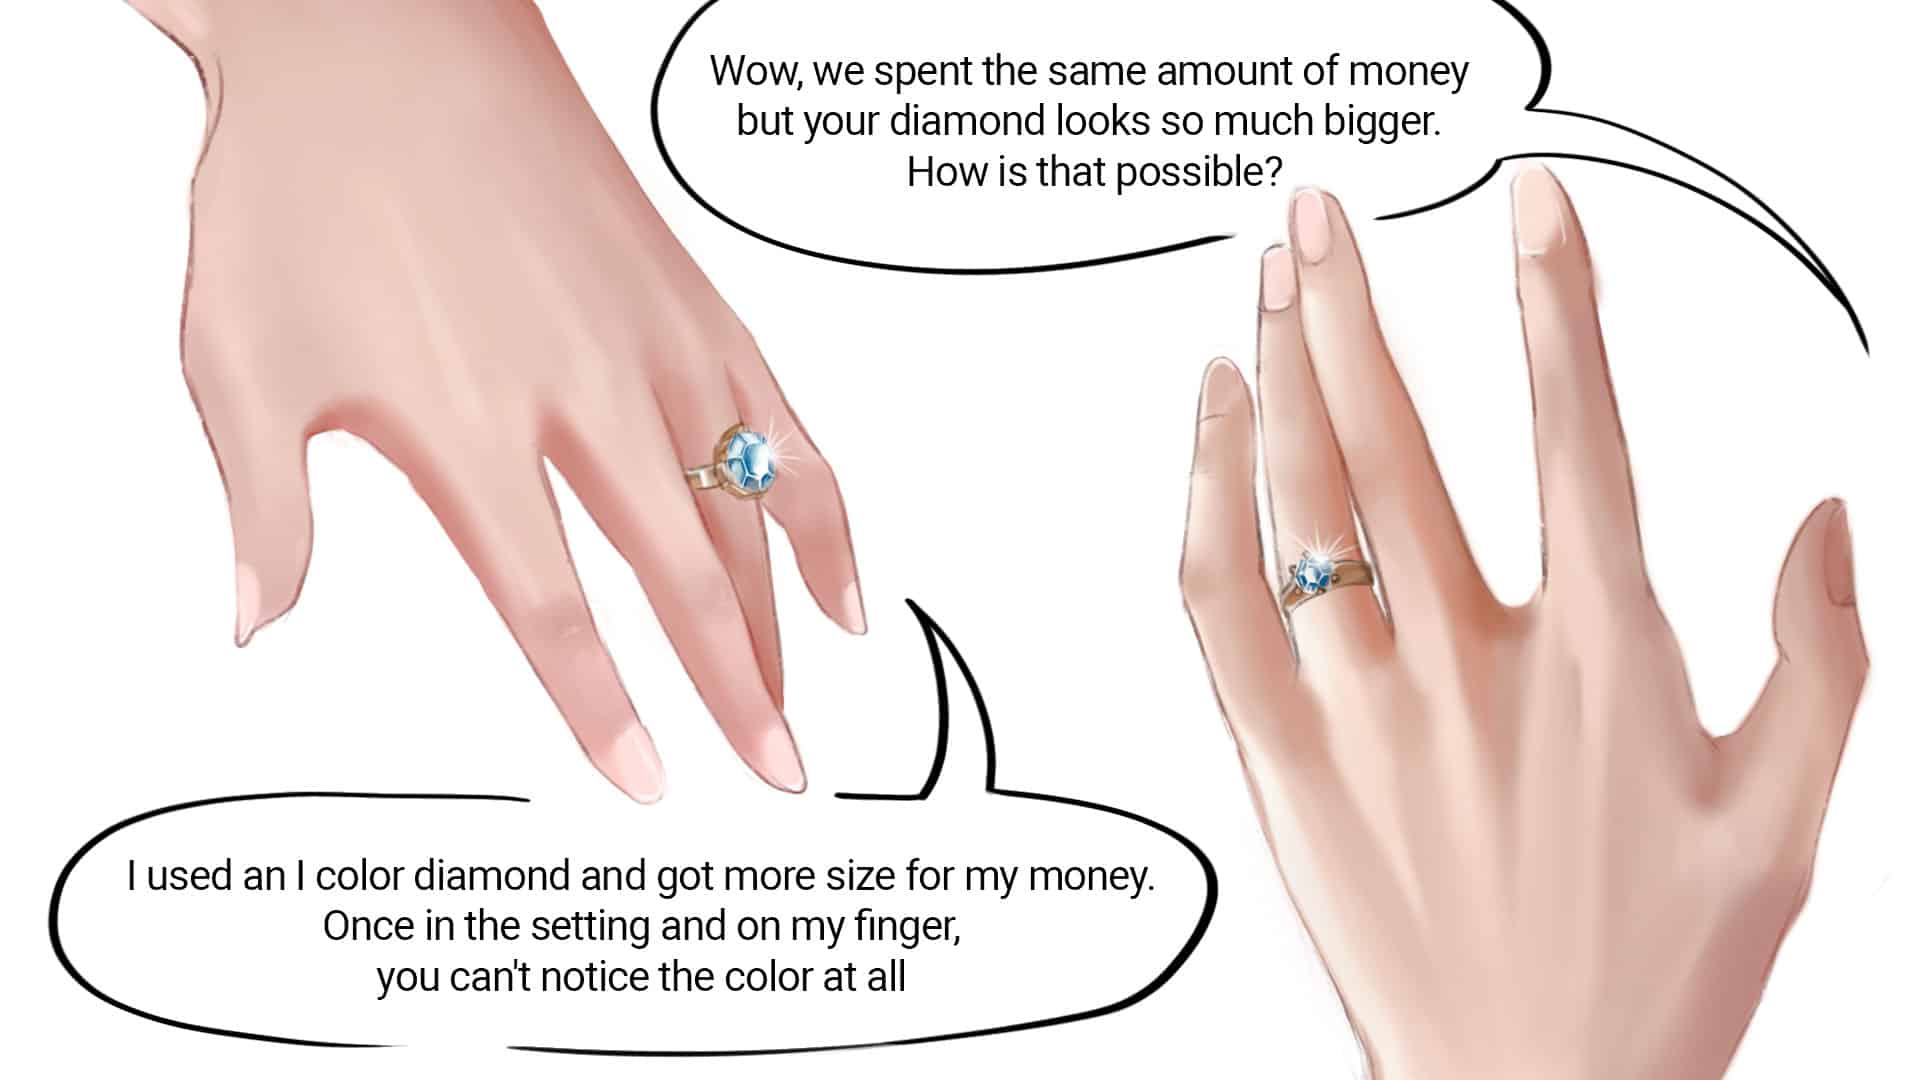 How Diamond Color Affects Appearance